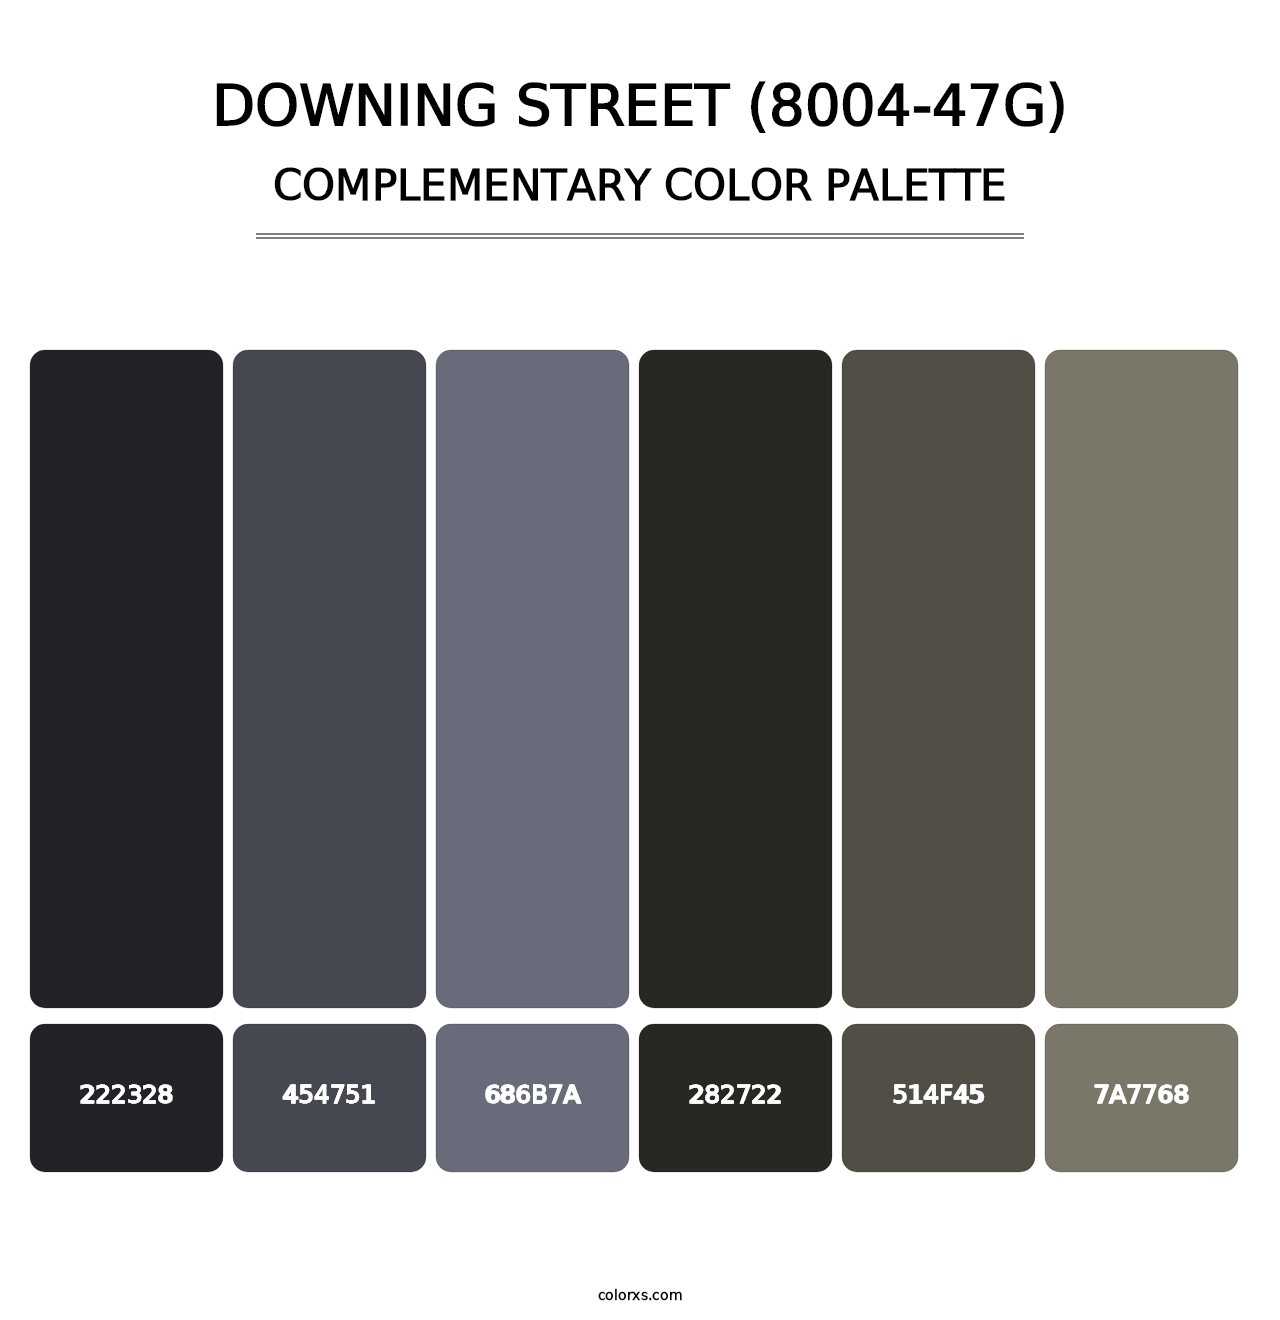 Downing Street (8004-47G) - Complementary Color Palette